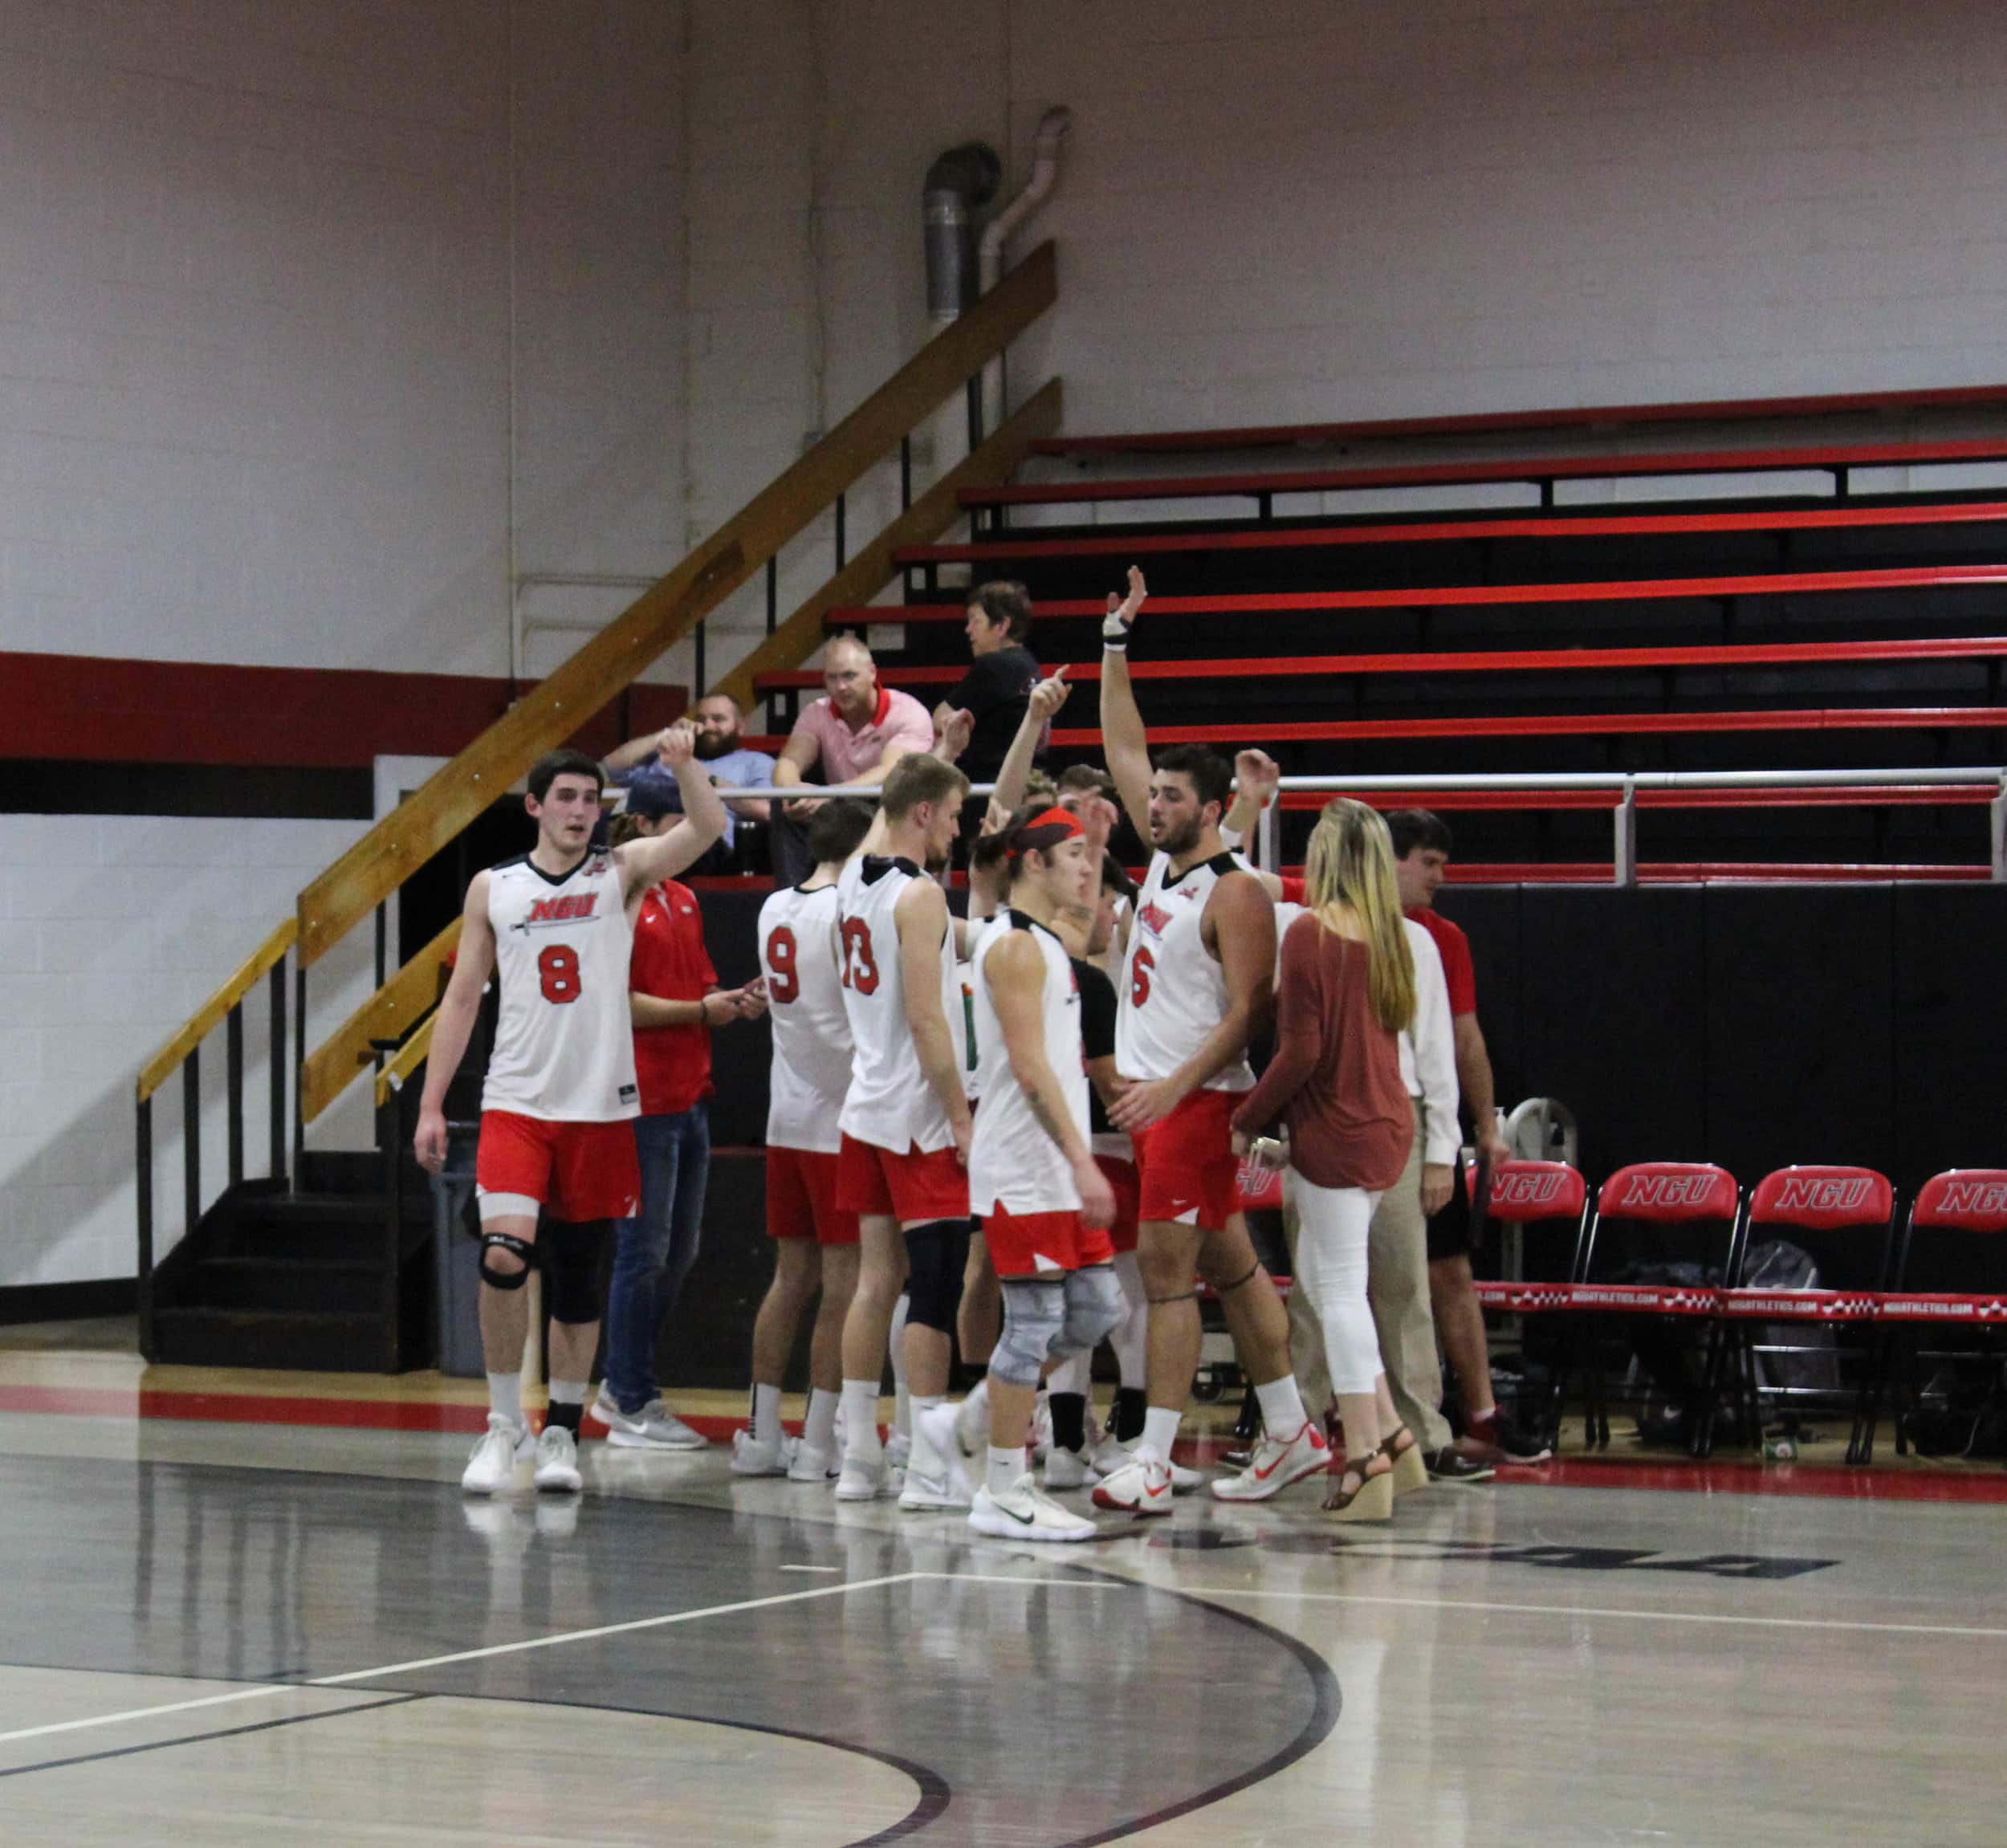 The NGU Mens Volleyball team huddle together during a timeout.